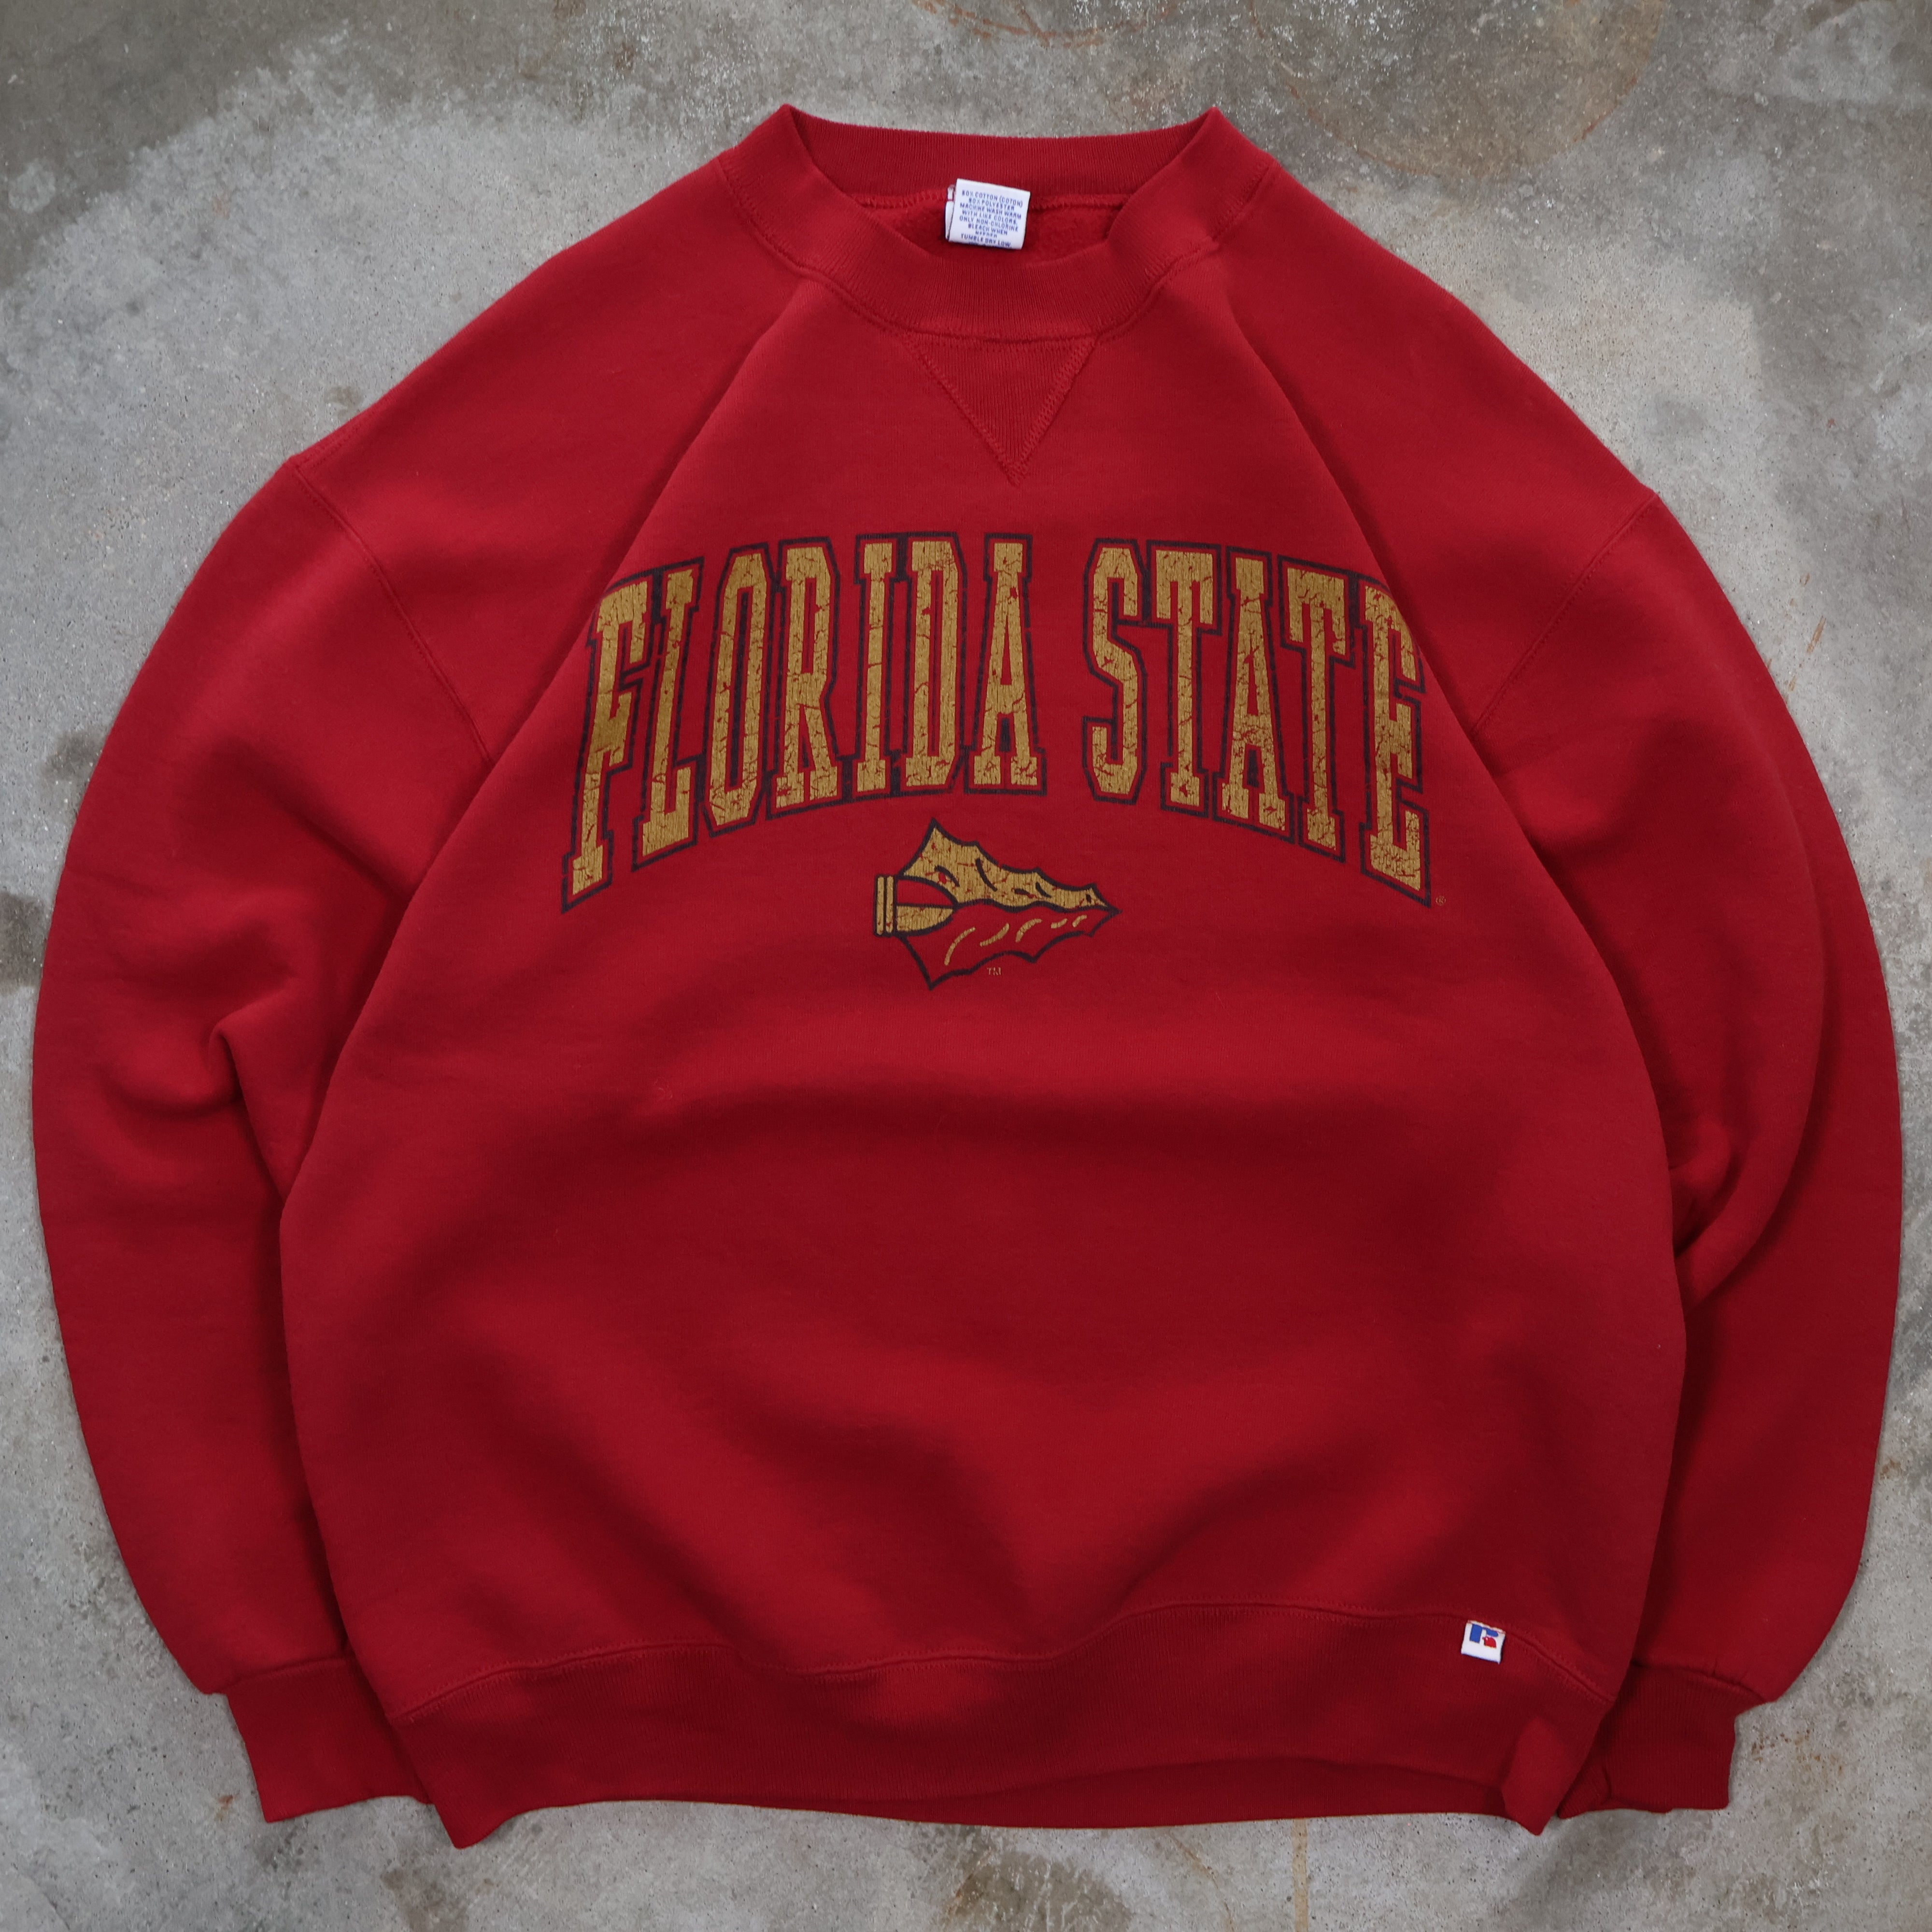 Florida State Russell Athletic Sweatshirt 90s (XL)